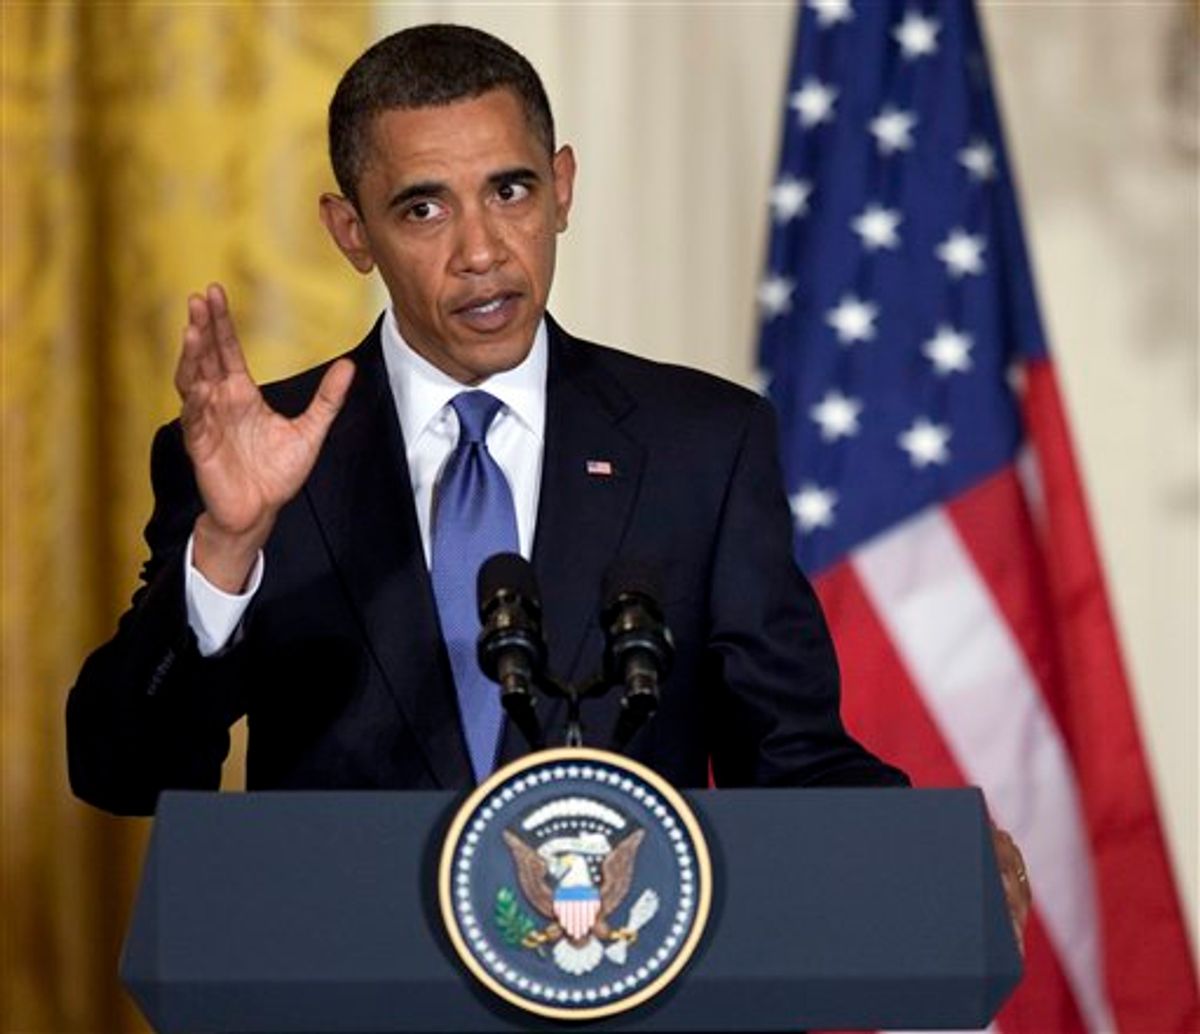 President Barack Obama gestures during a news conference with Afghanistan's President Hamid Karzai in the East Room of the White House on Wednesday, May  12, 2010 in Washington. (AP Photo/Evan Vucci)    (AP)